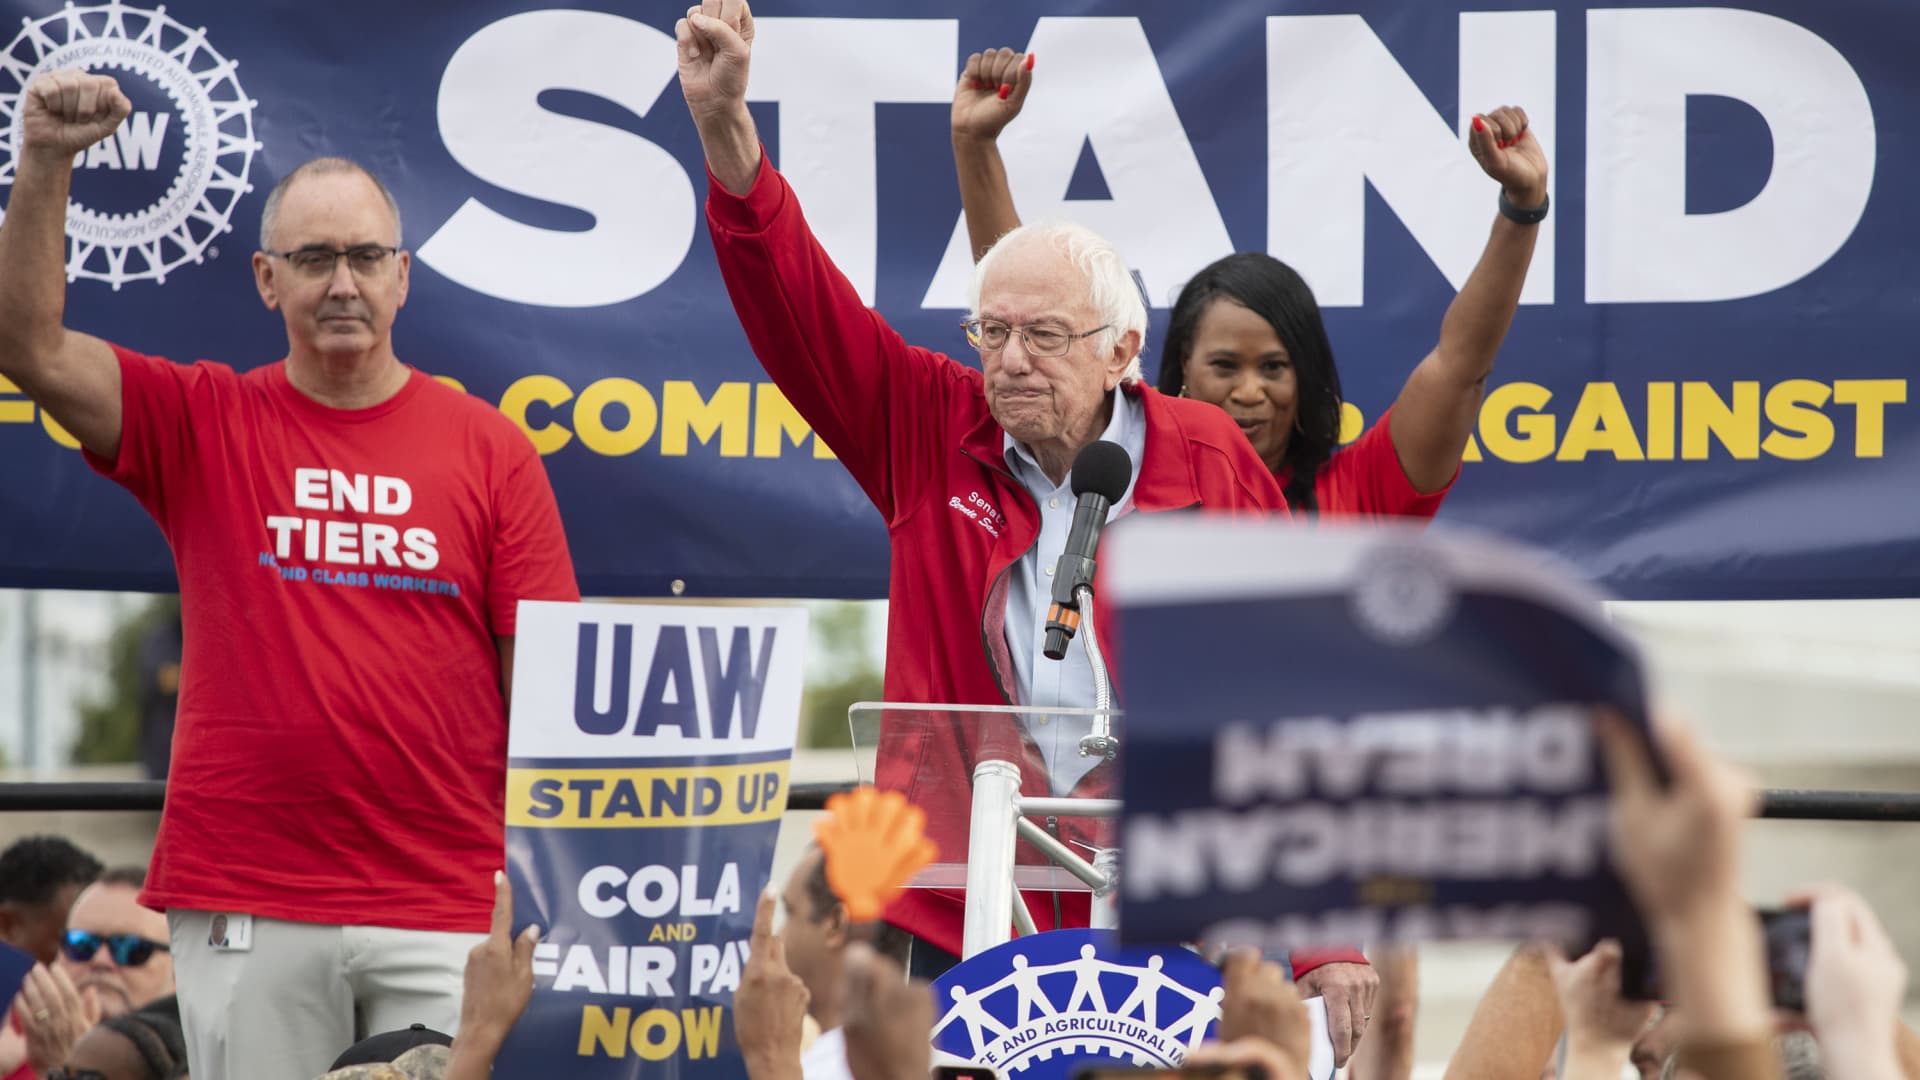 Bernie Sanders calls out automaker CEOs at UAW rally: ‘End your greed’